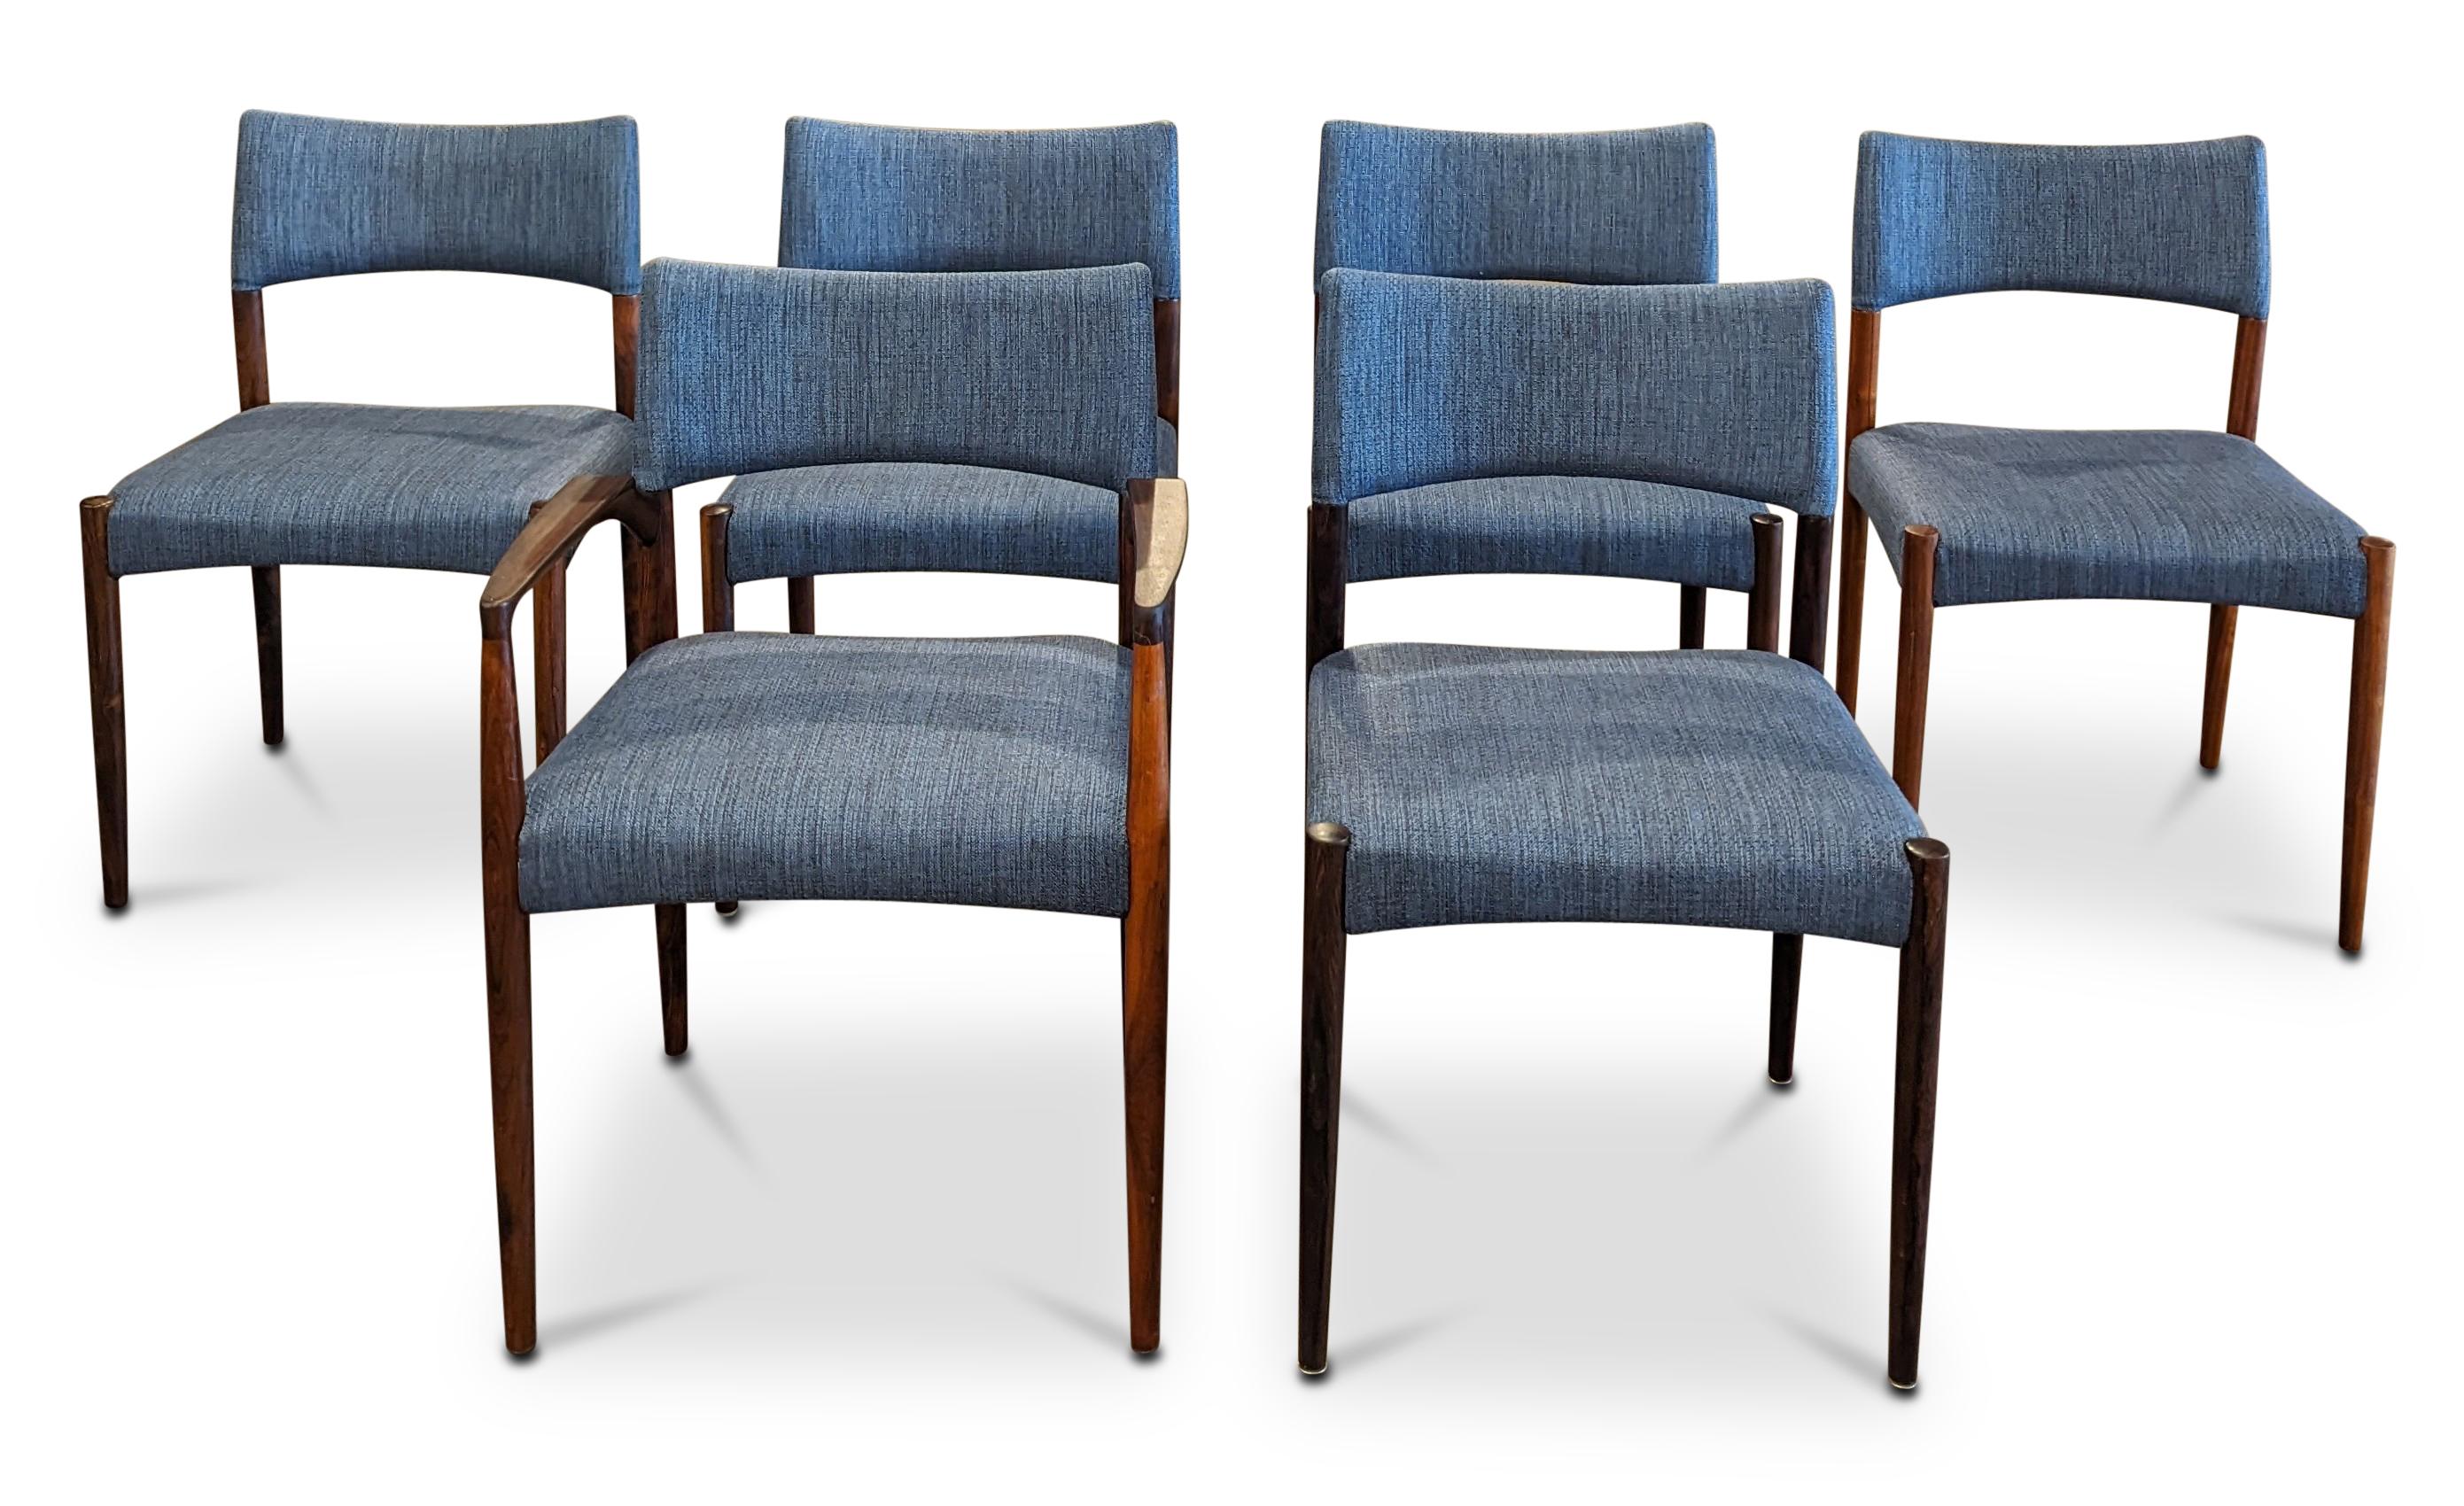 Blue Fabric. New Upholstery

Vintage Danish mid-century modern, made in the 1950's - Recently refurbished

The piece is more than 65+ years old and some wear and tear can be expected, but we do everything we can to refurbish them in respect to the